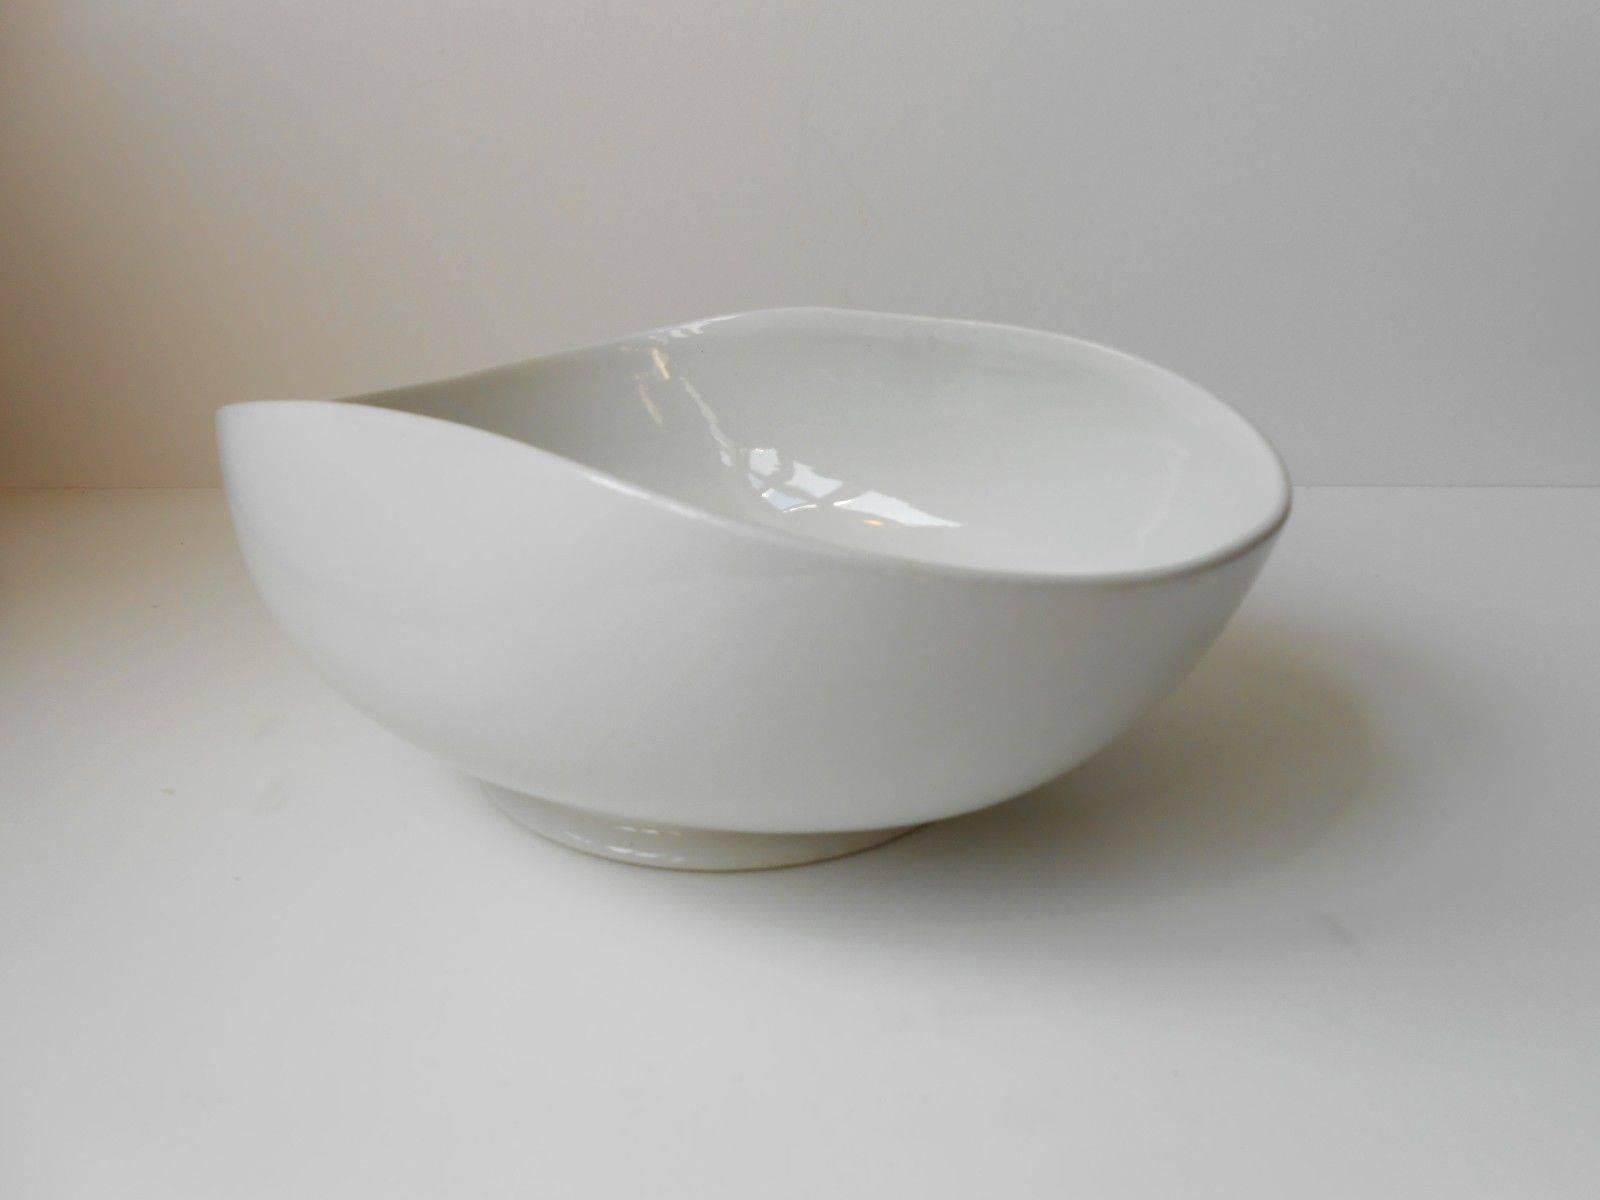 This rare curved white glazed ceramic bowl was designed in 1938 by the Swedish ceramist Wilhelm Kåge. It's a part of the soft forms lin (Fin: Mjuka Formernas). The open organic and biomorphic design, while strikingly simple, was ingeniously